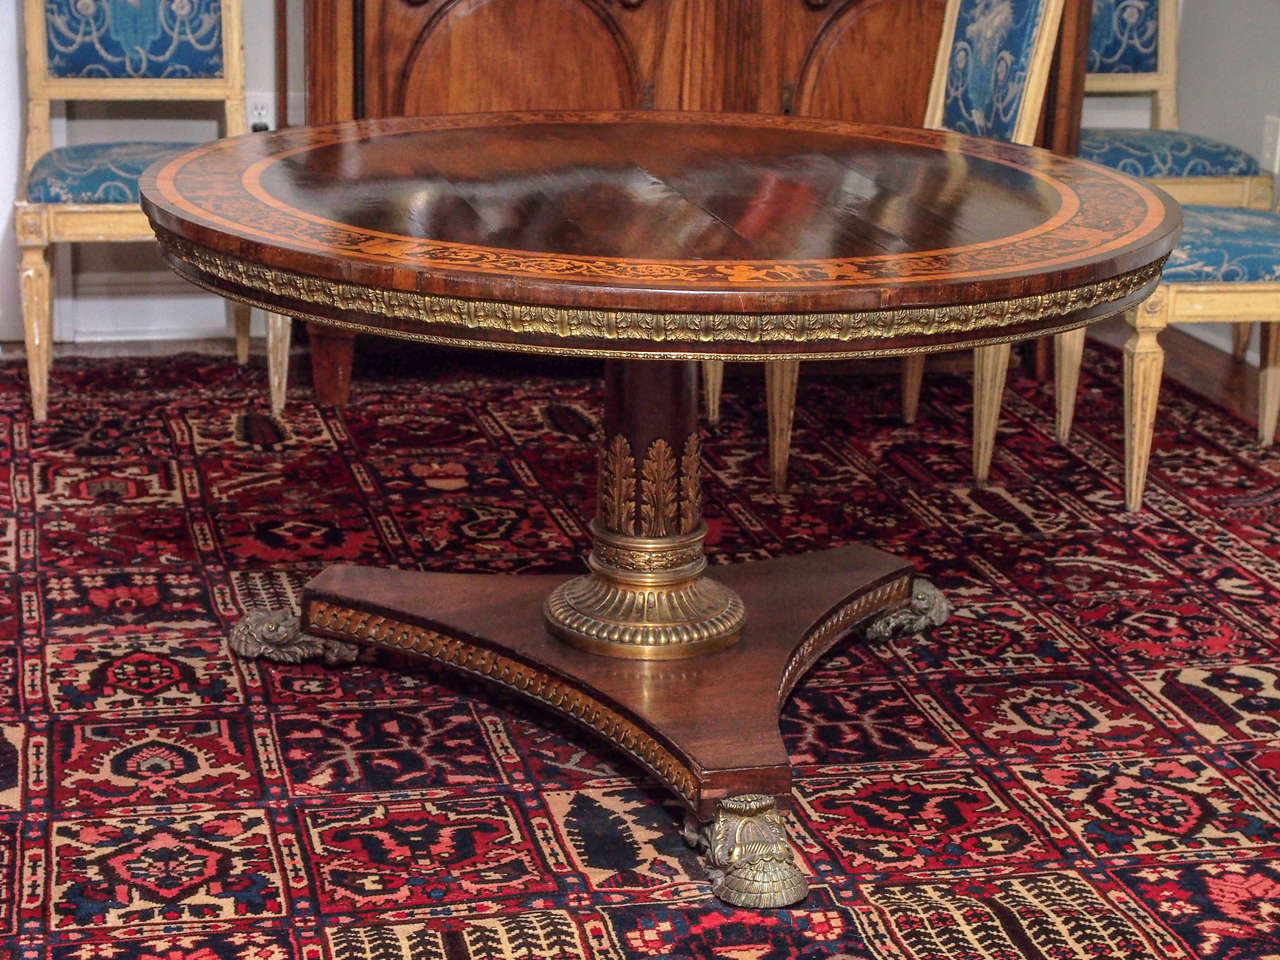 English Regency rosewood supper table with intricate yew marquetry inlay and extensive bronze mounts. The apron is mounted with foliate design bronze. The central pedestal has acanthus climbing up from a fluted collar and the trifed base has inset